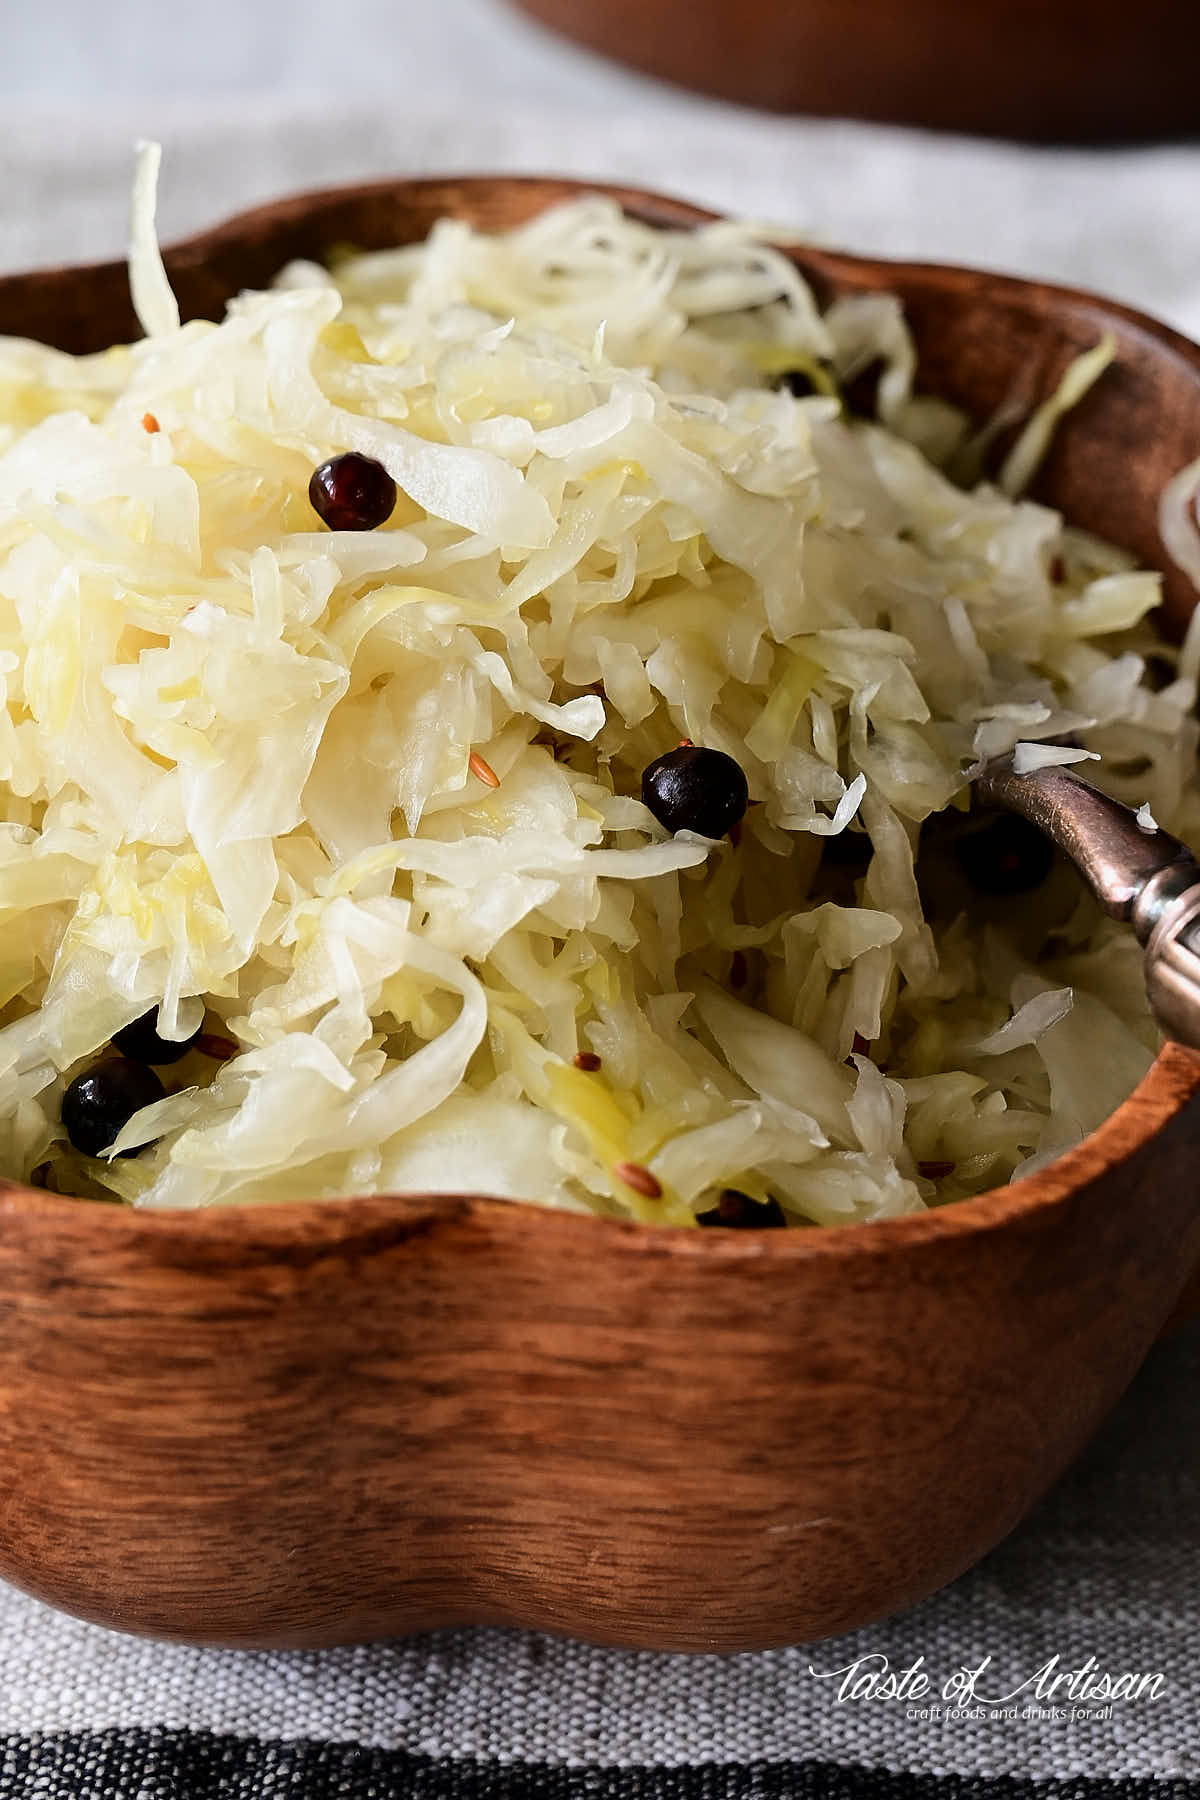 Close up of fermented sauerkraut in a bowl ready to eat.